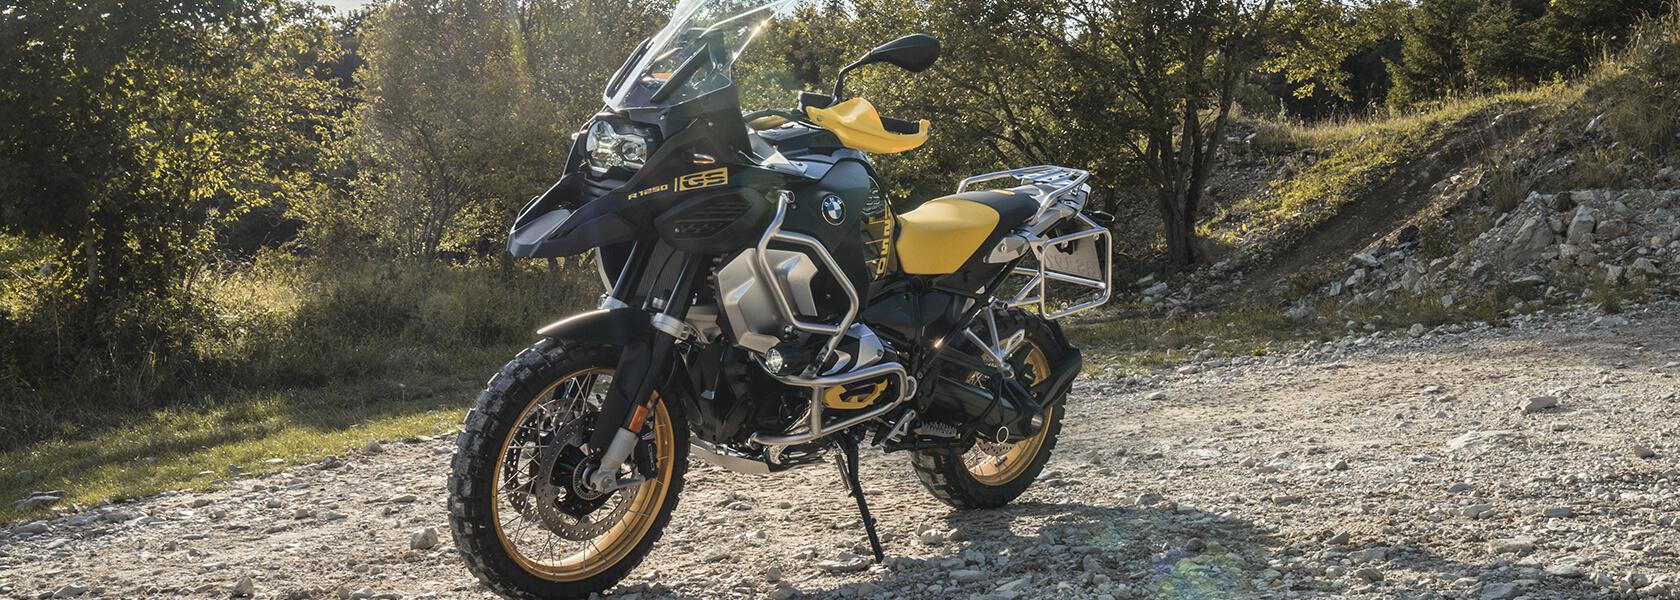 BMW R 1250 GS Adventure - Edition 40 years GS